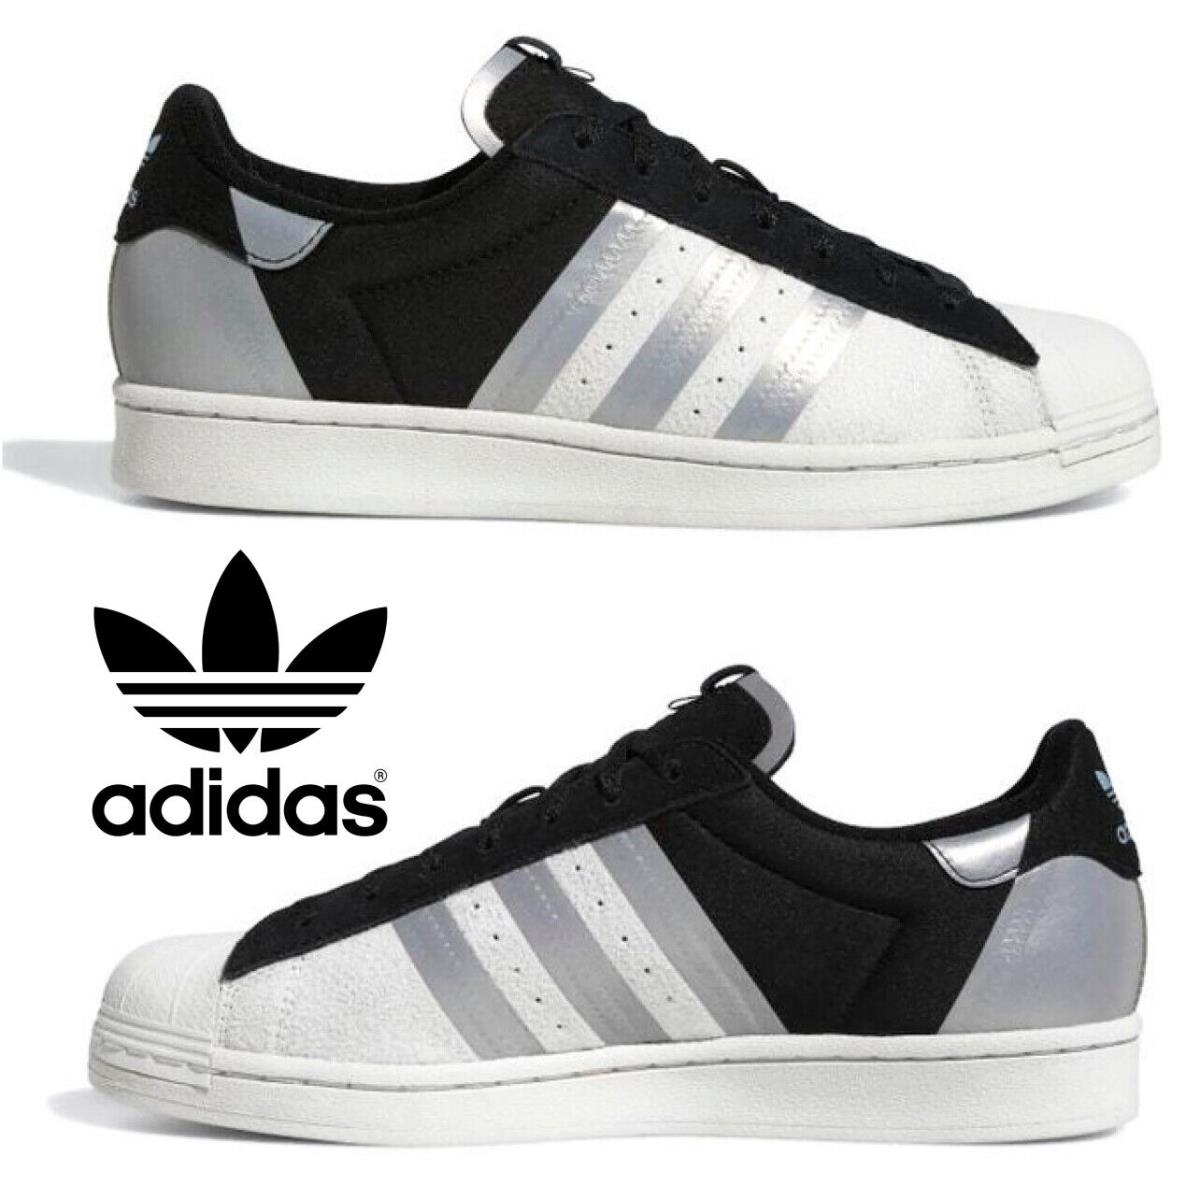 Adidas Originals Superstar Men`s Sneakers Comfort Sport Casual Shoes Black Grey - Black , Leather, synthetic, and/or textile upper Manufacturer